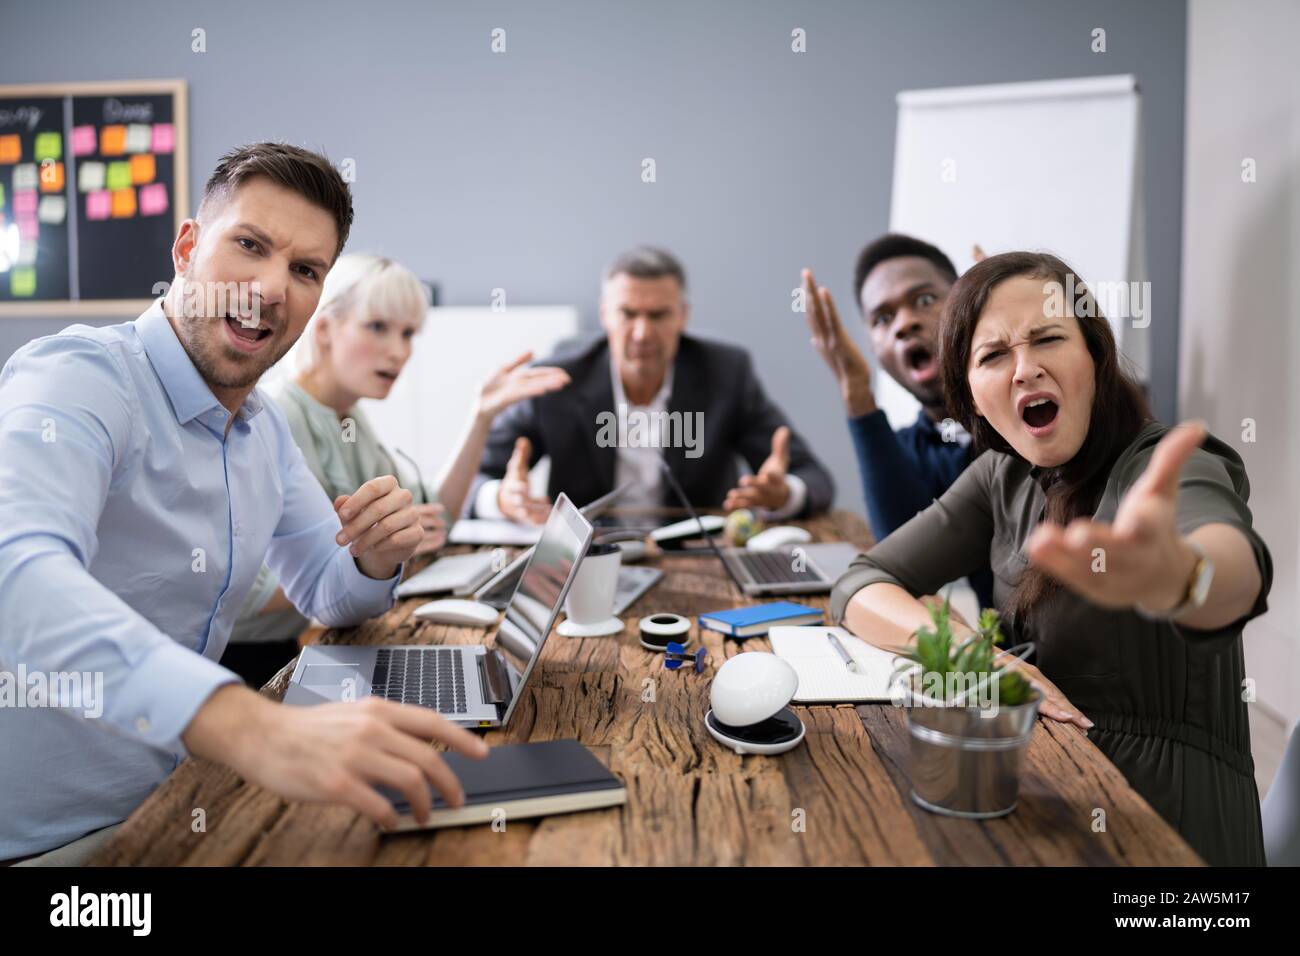 Group Of Business Executives Complaining Toward Camera In Office Stock Photo